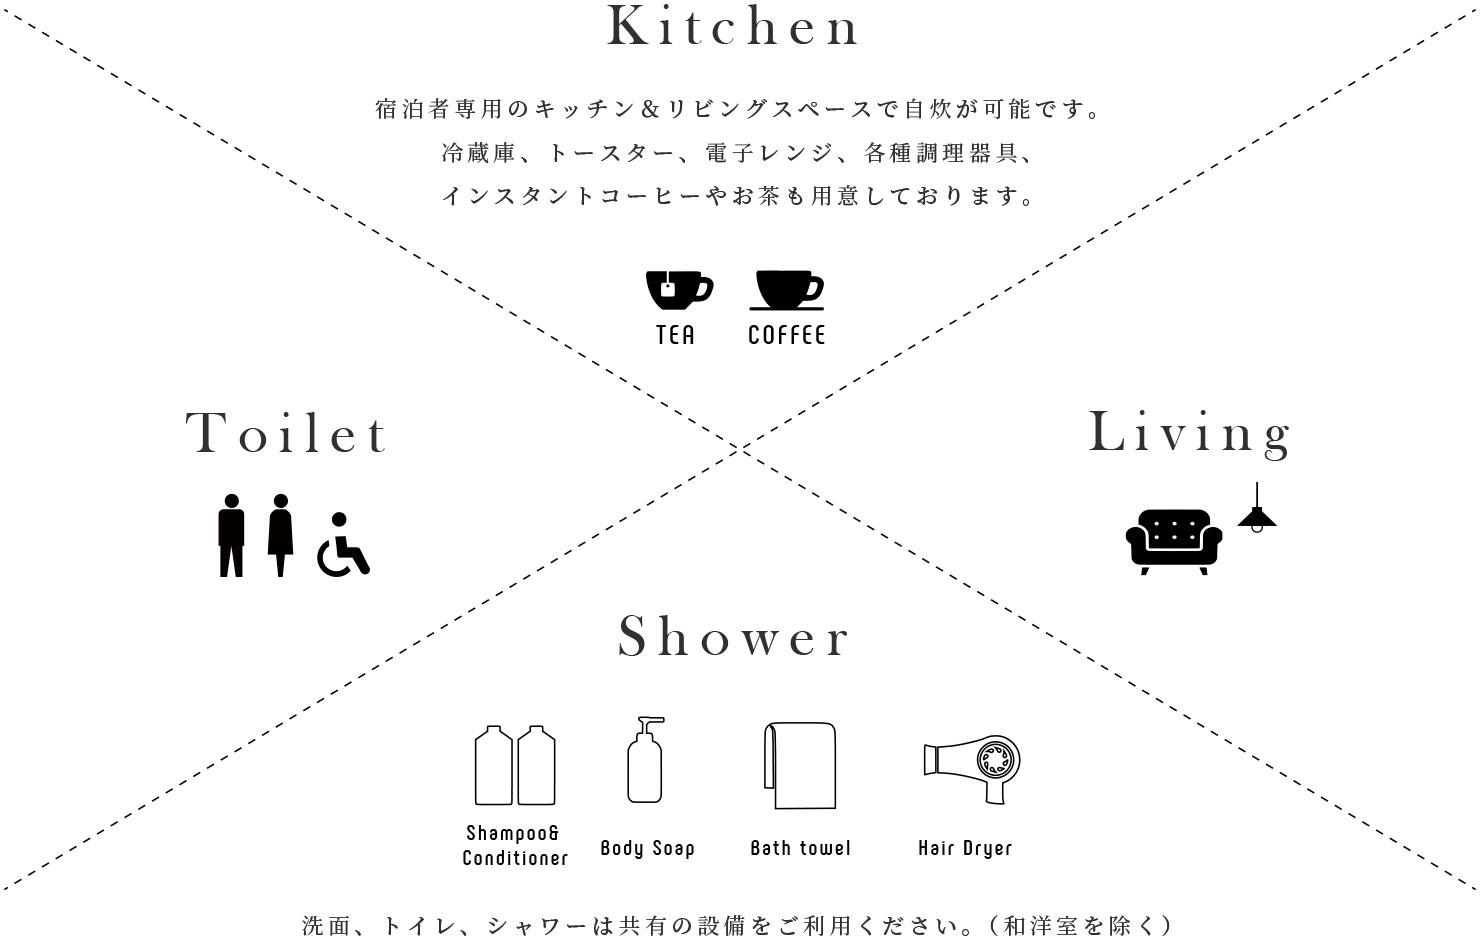 COMMON SPACE - Kitchen / Toilet / Living / Shower